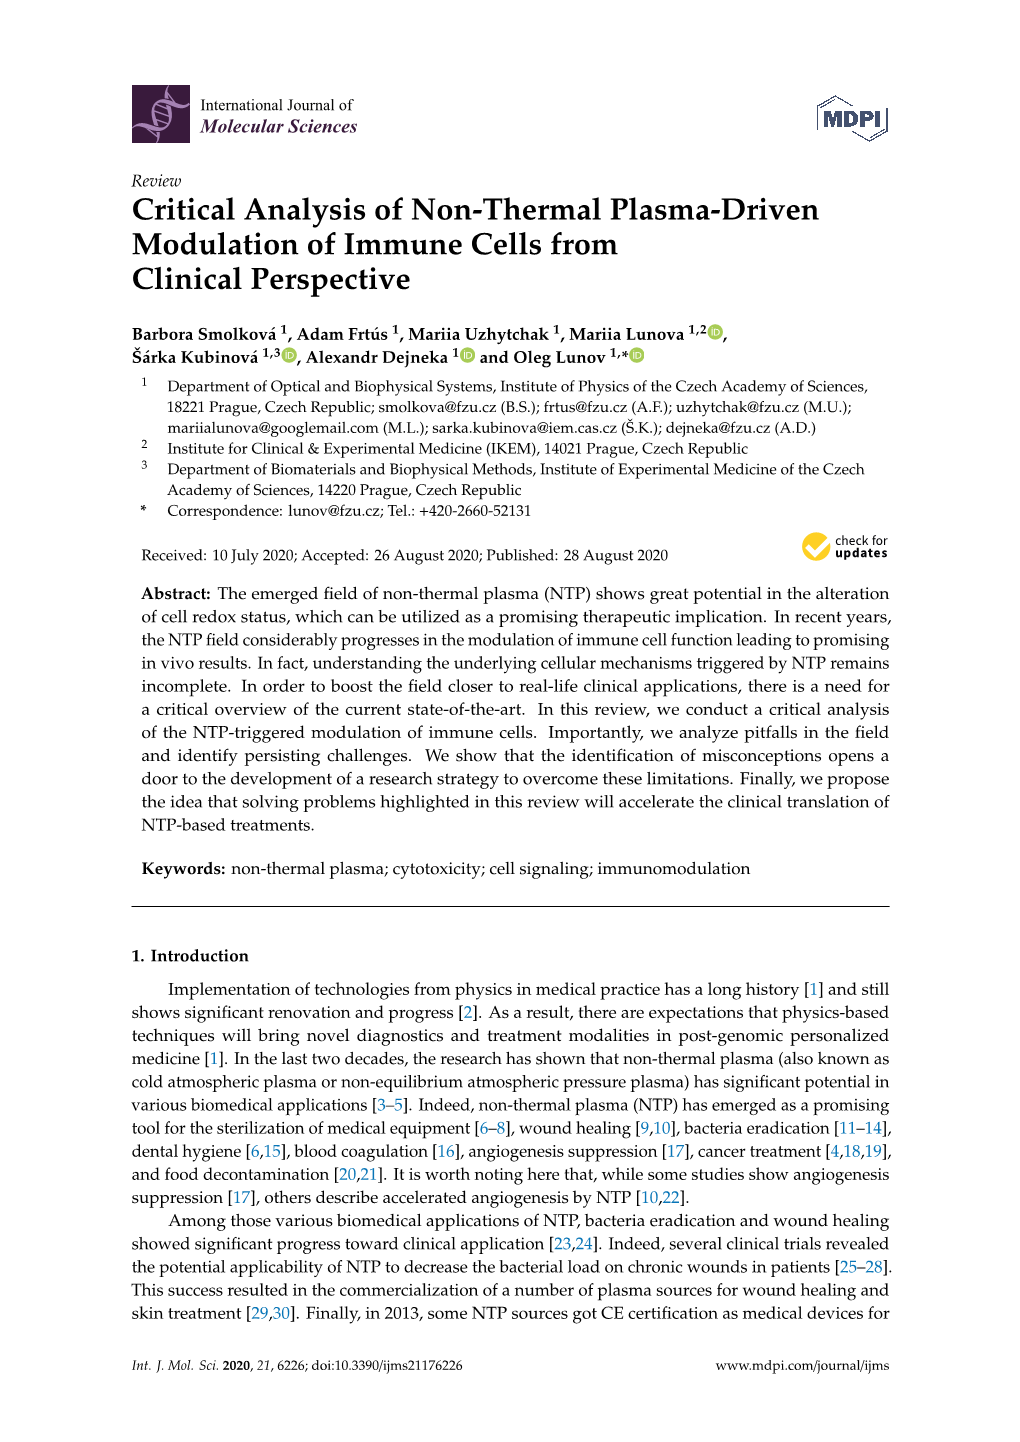 Critical Analysis of Non-Thermal Plasma-Driven Modulation of Immune Cells from Clinical Perspective